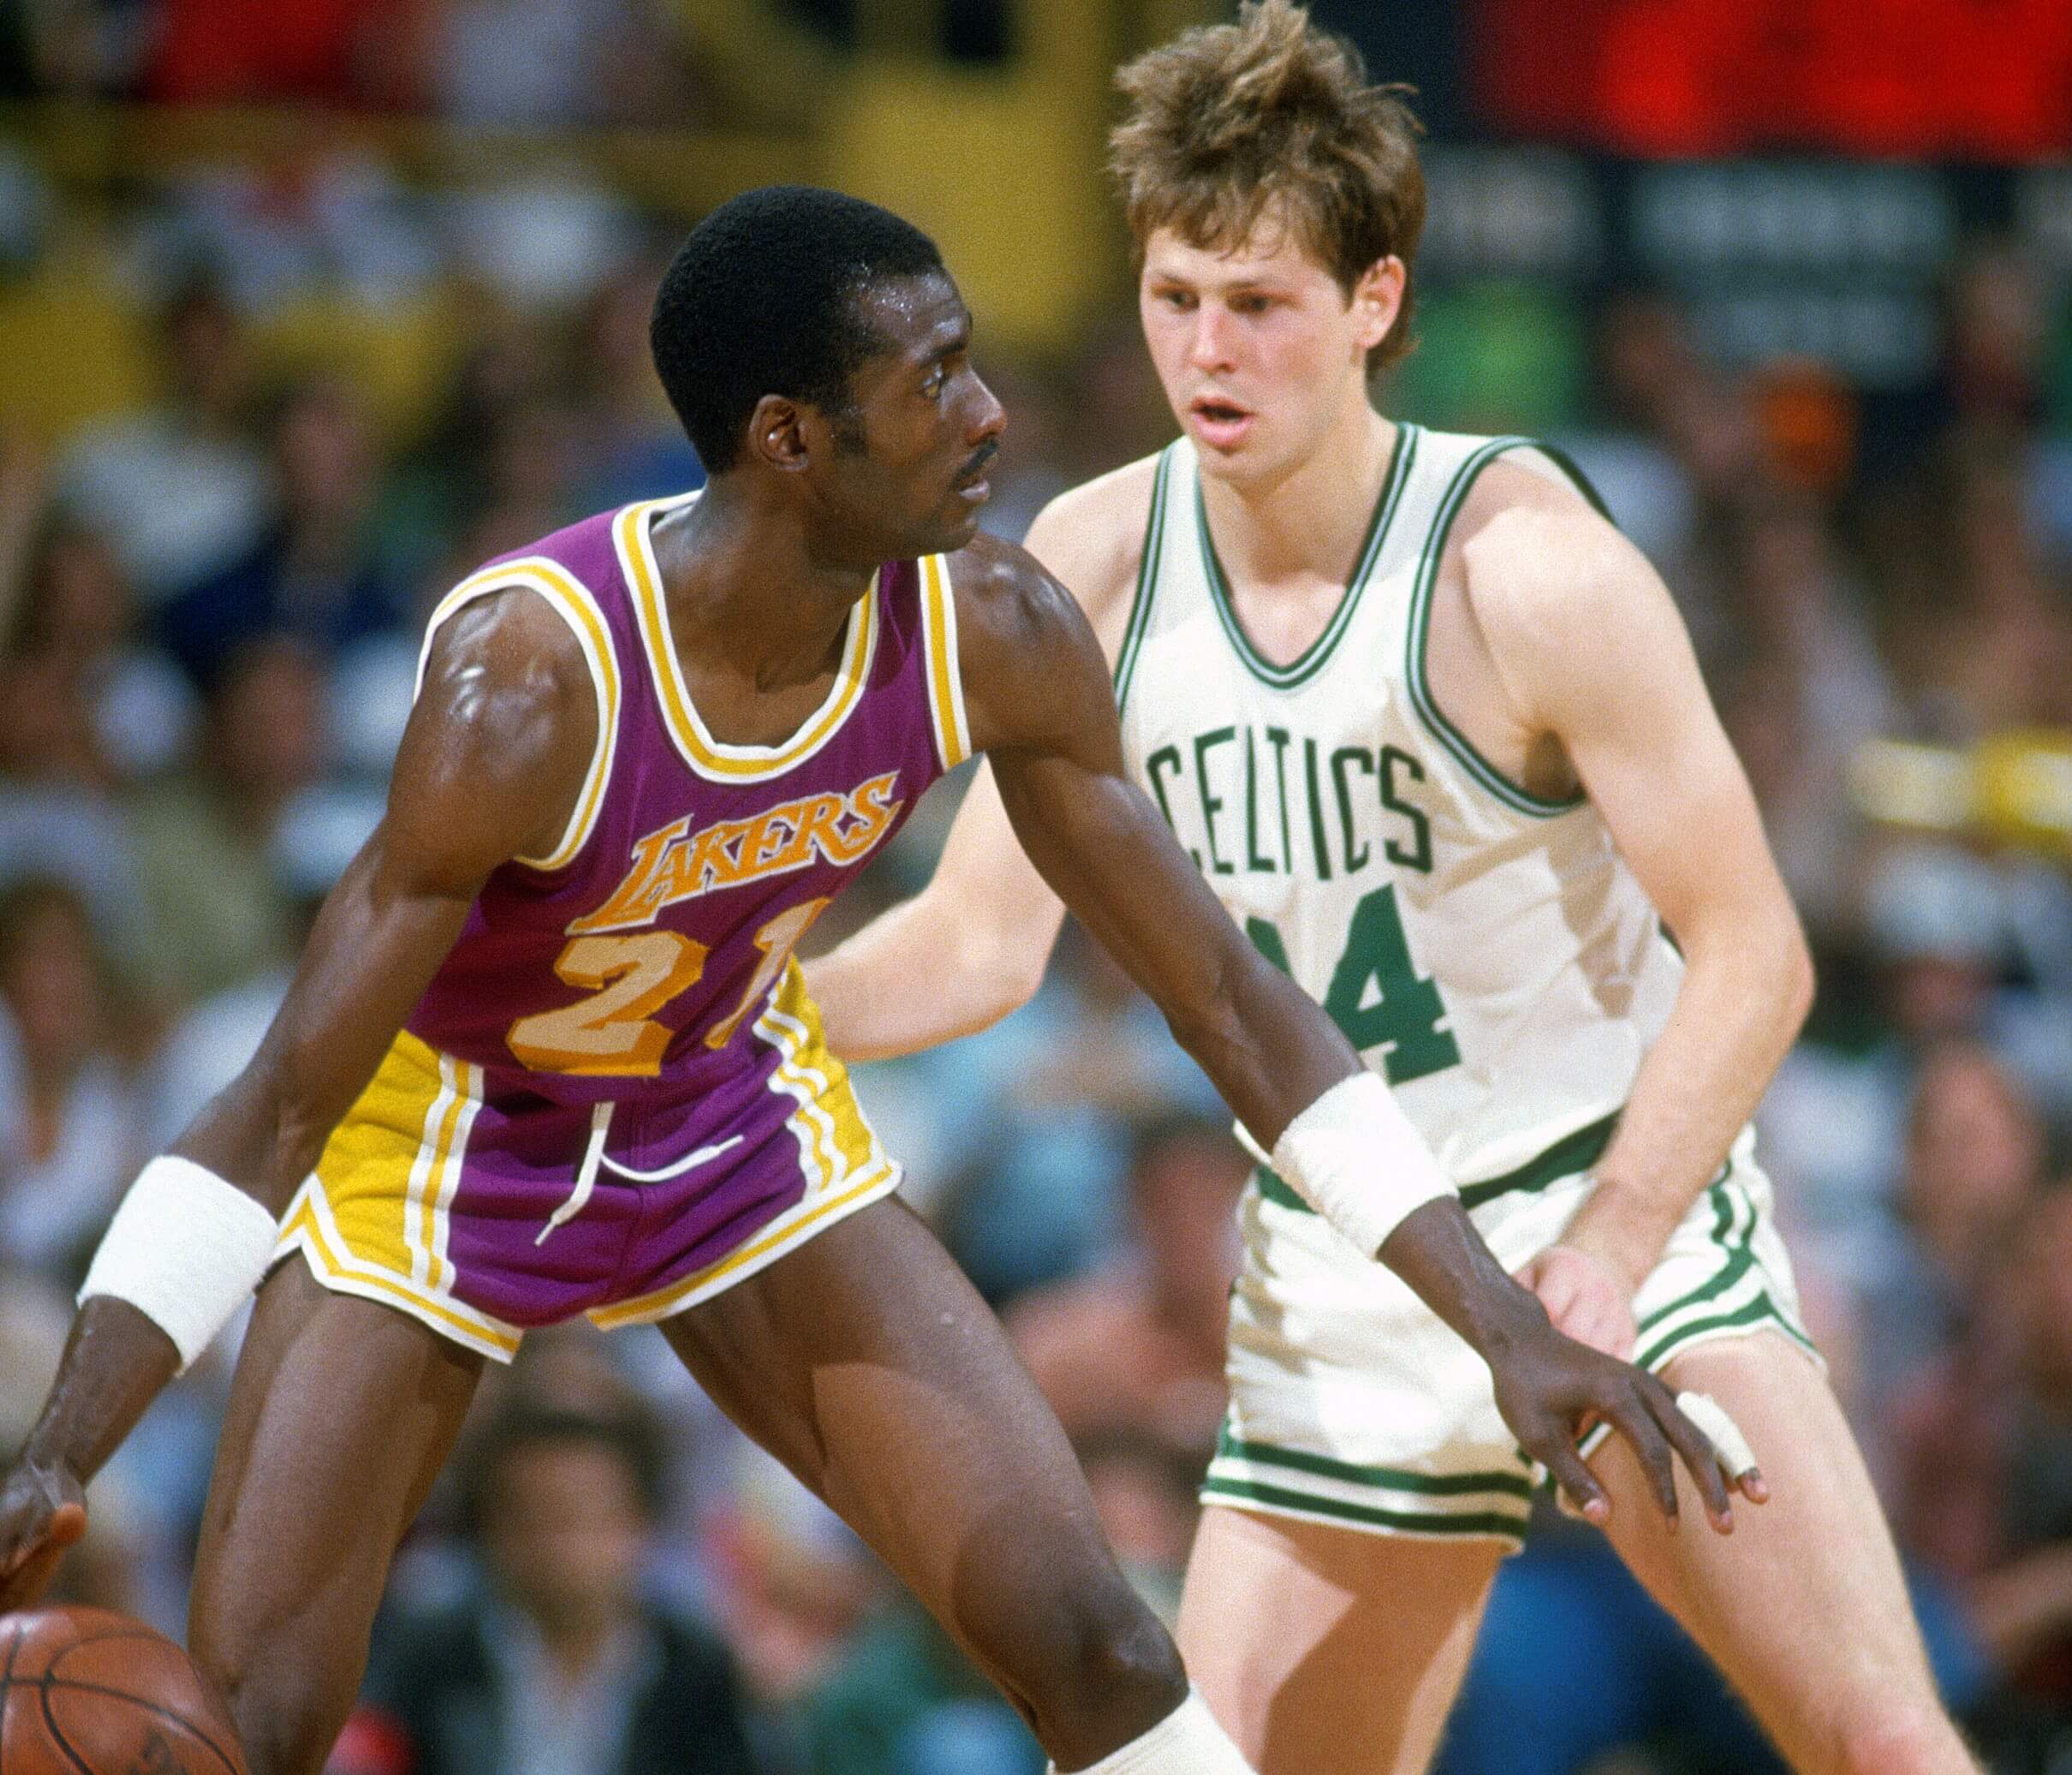 Danny Ainge of the Boston Celtics guards Michael Cooper of the Los Angeles Lakers.